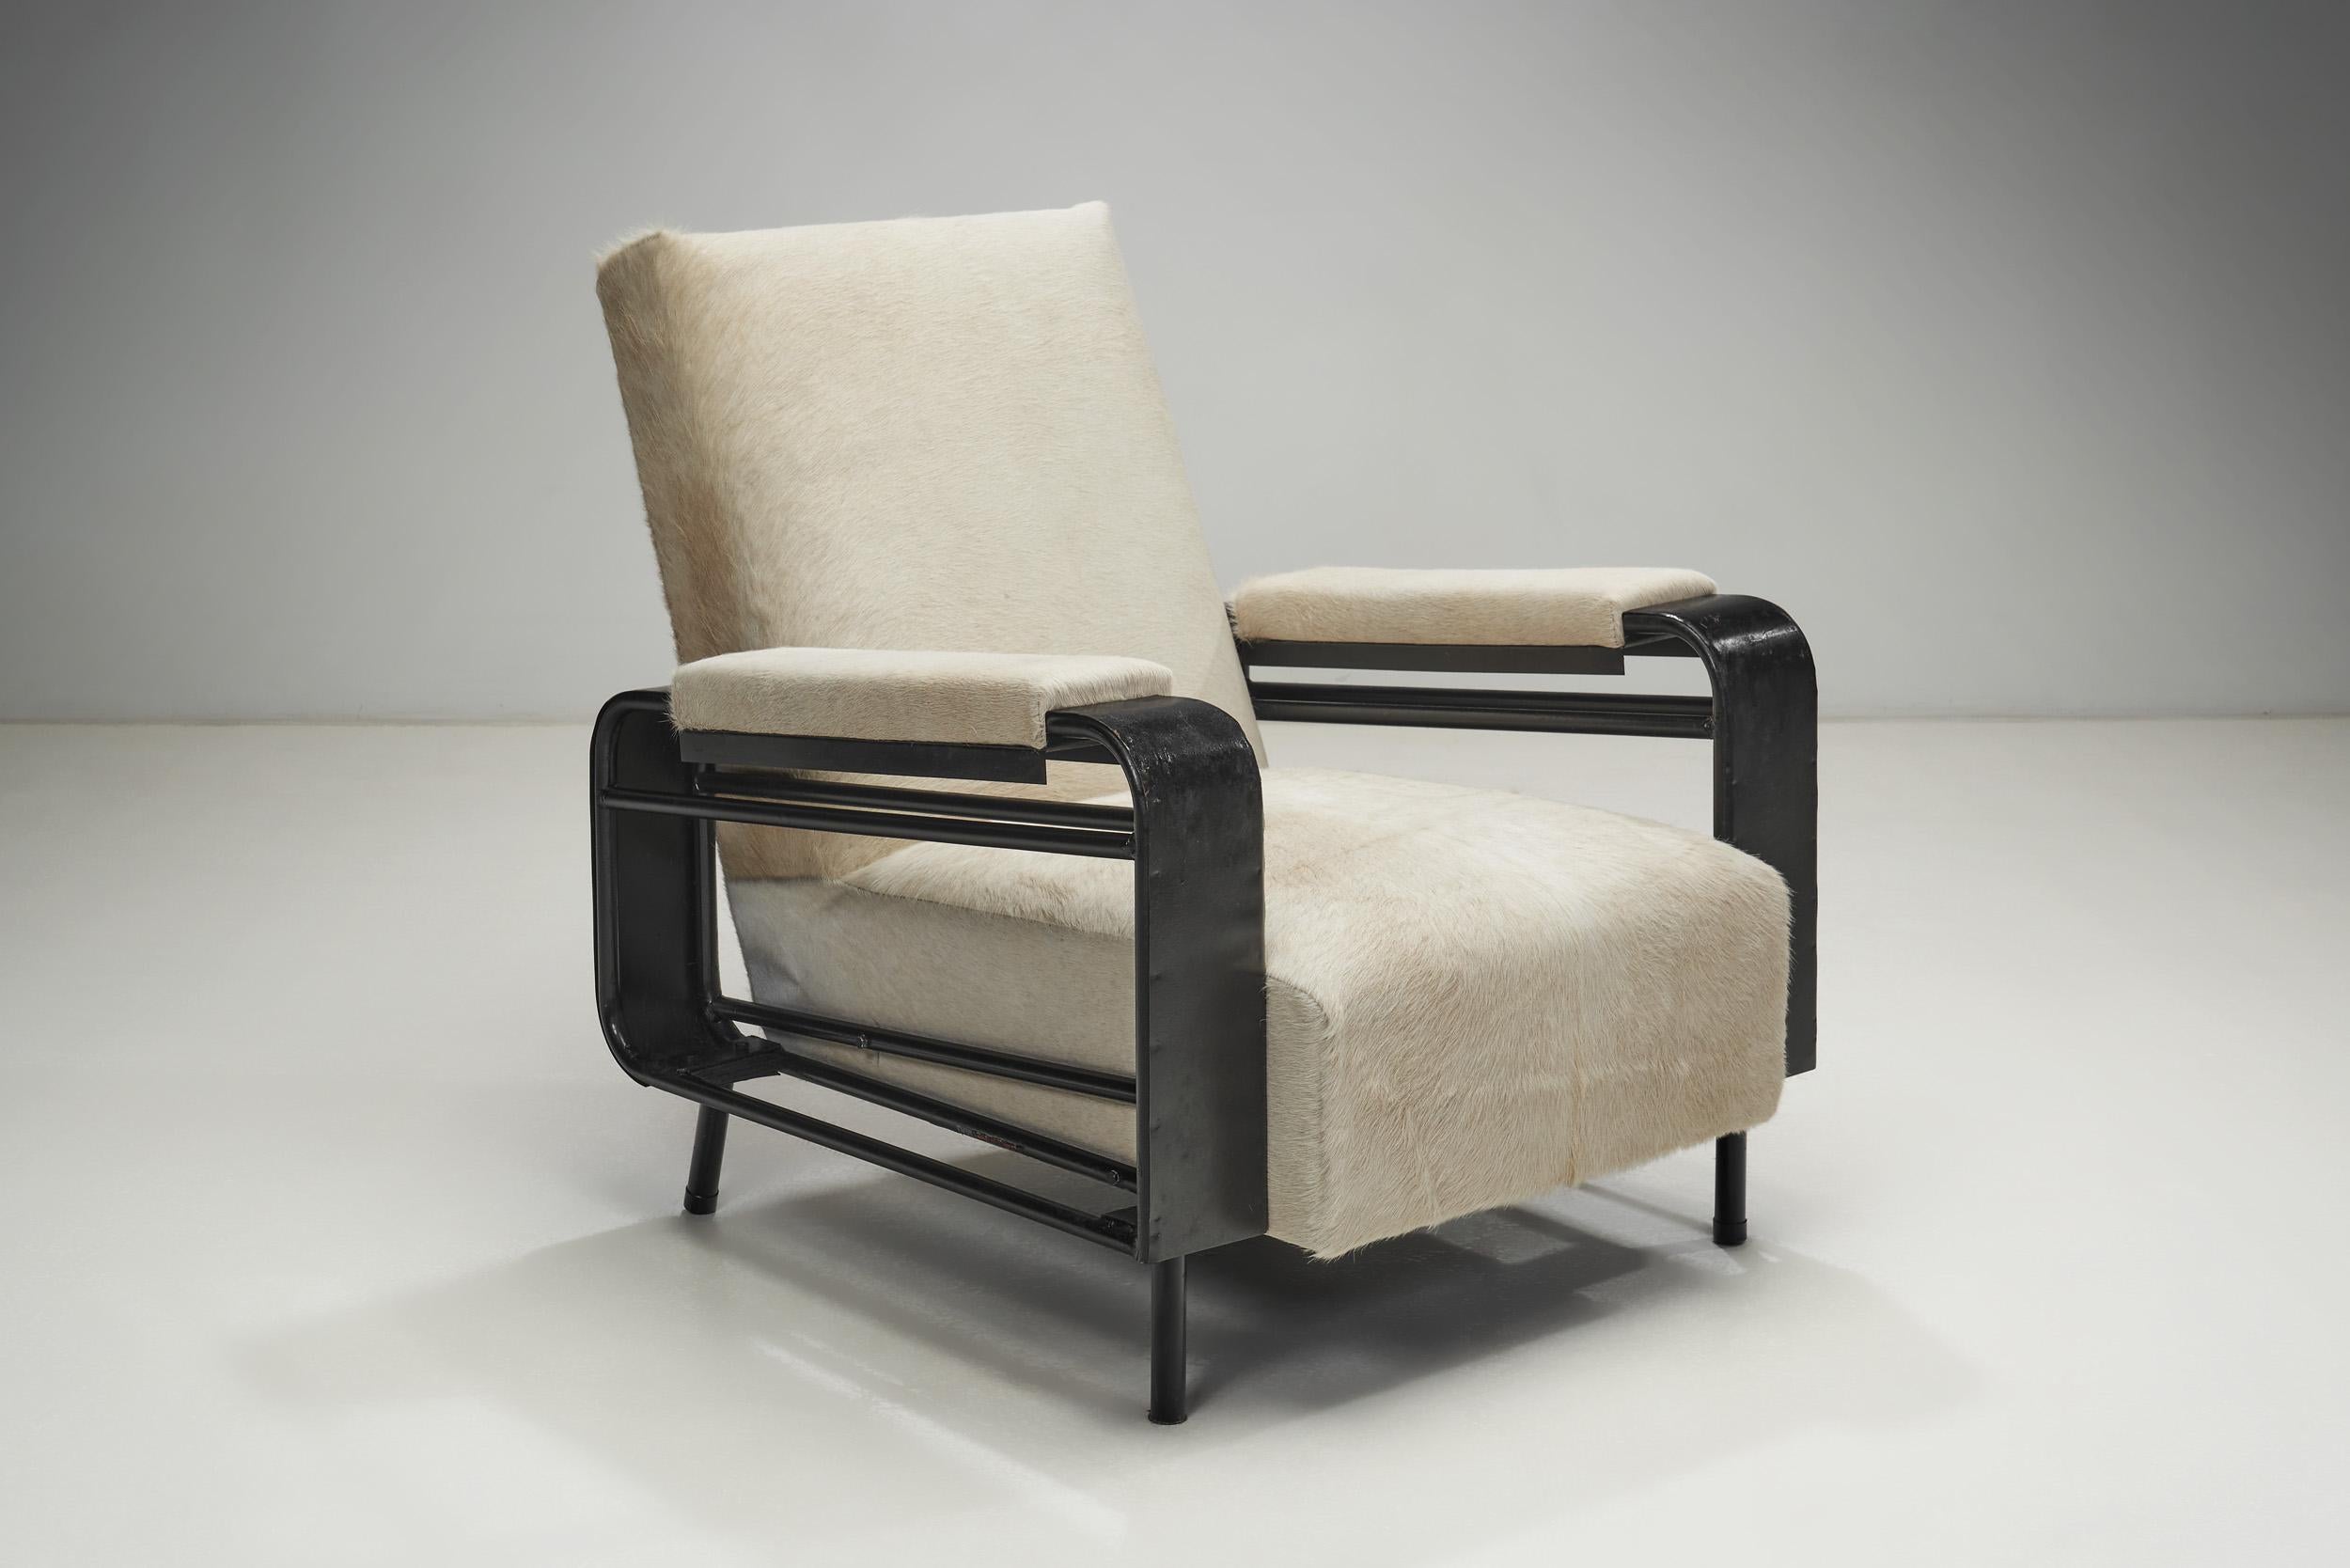 Airborne Metal Lounge Chairs Upholstered in Cow Hide, France ca 1950s For Sale 4